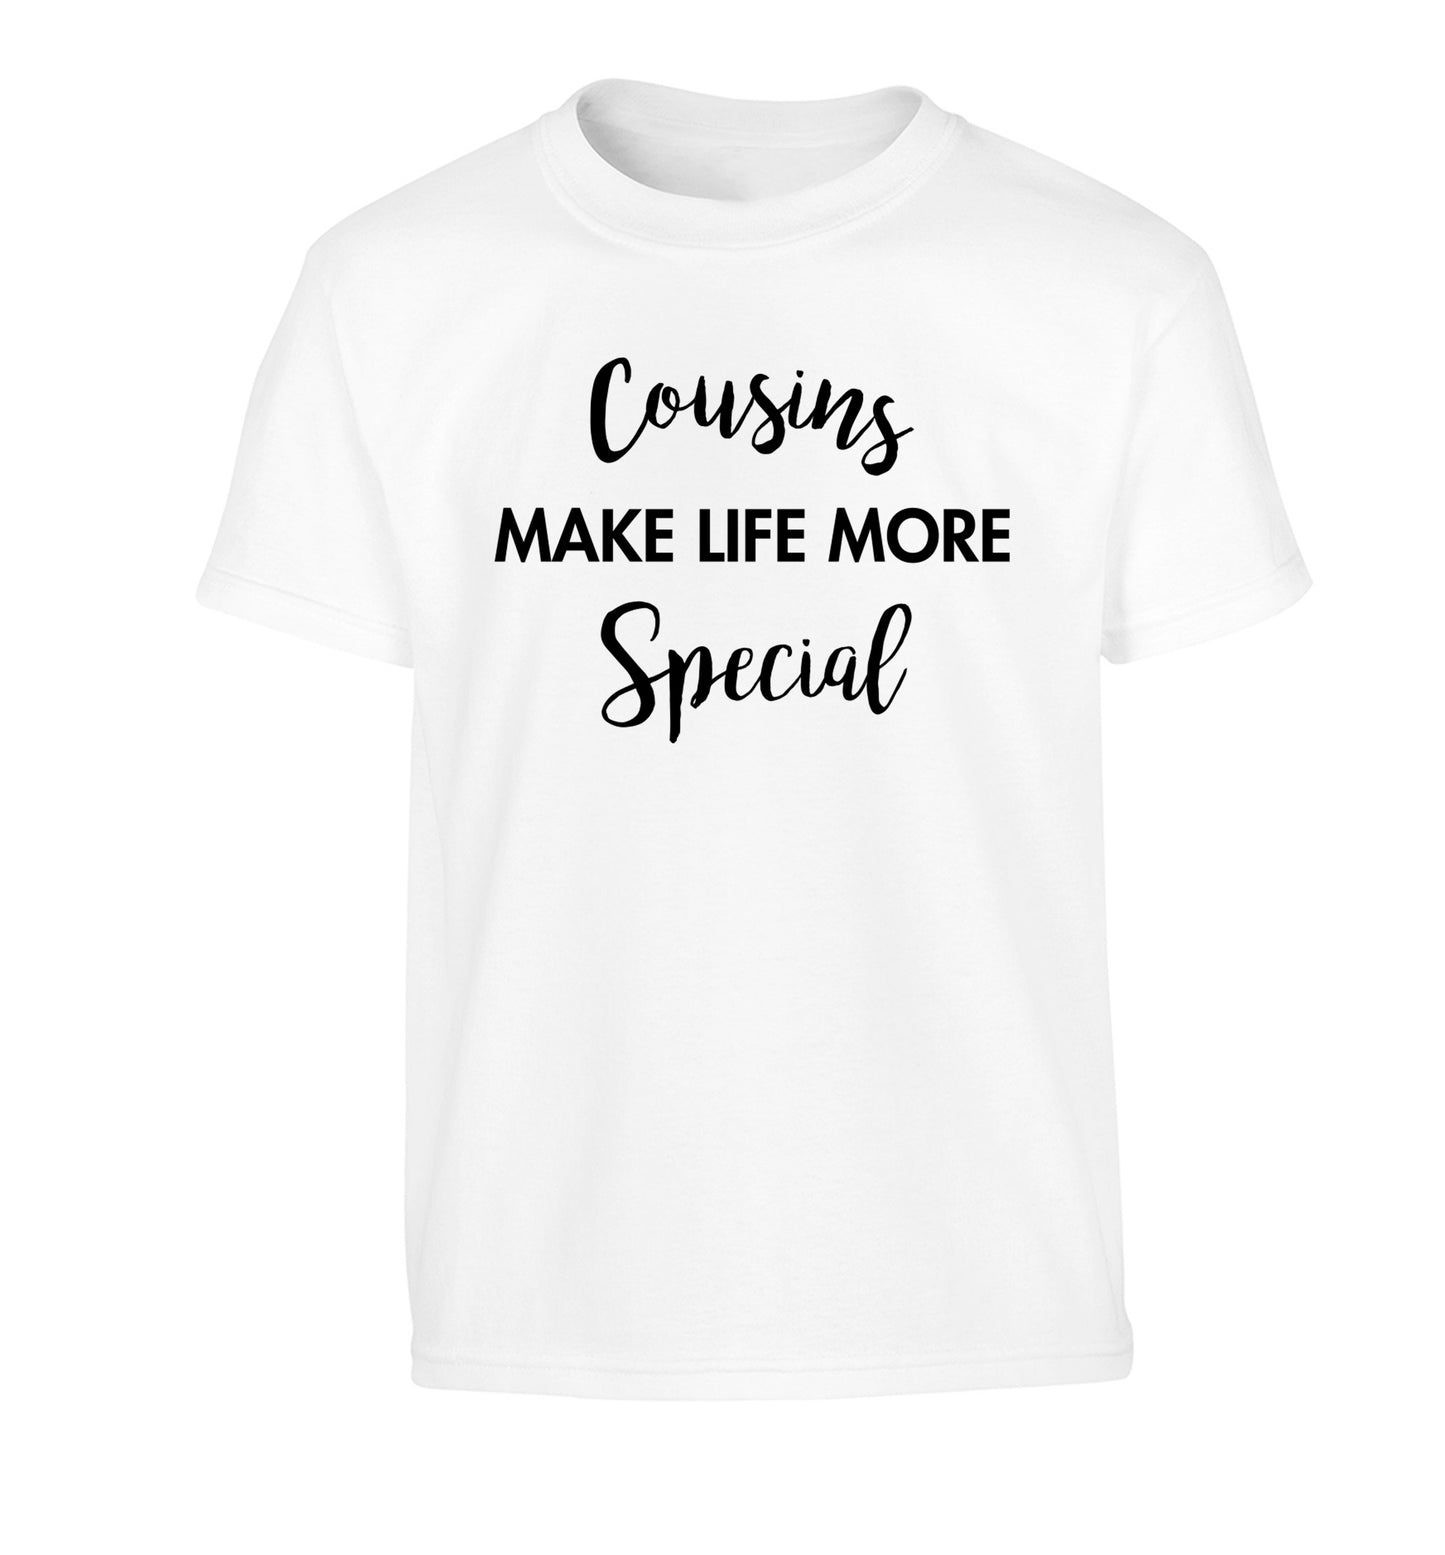 Cousins make life more special Children's white Tshirt 12-14 Years